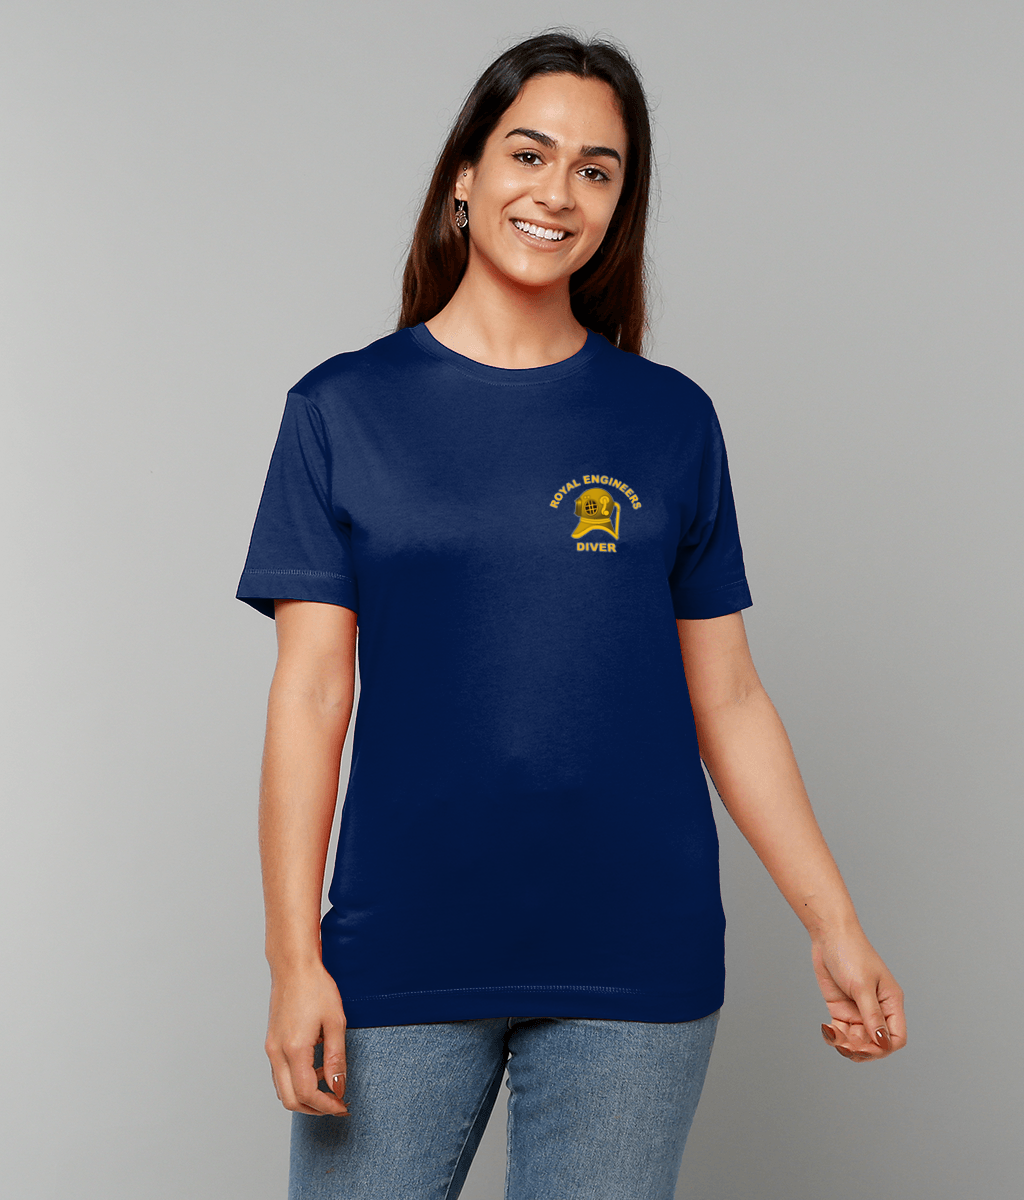 90 - Royal Engineers Diver T-Shirt (Printed Front)